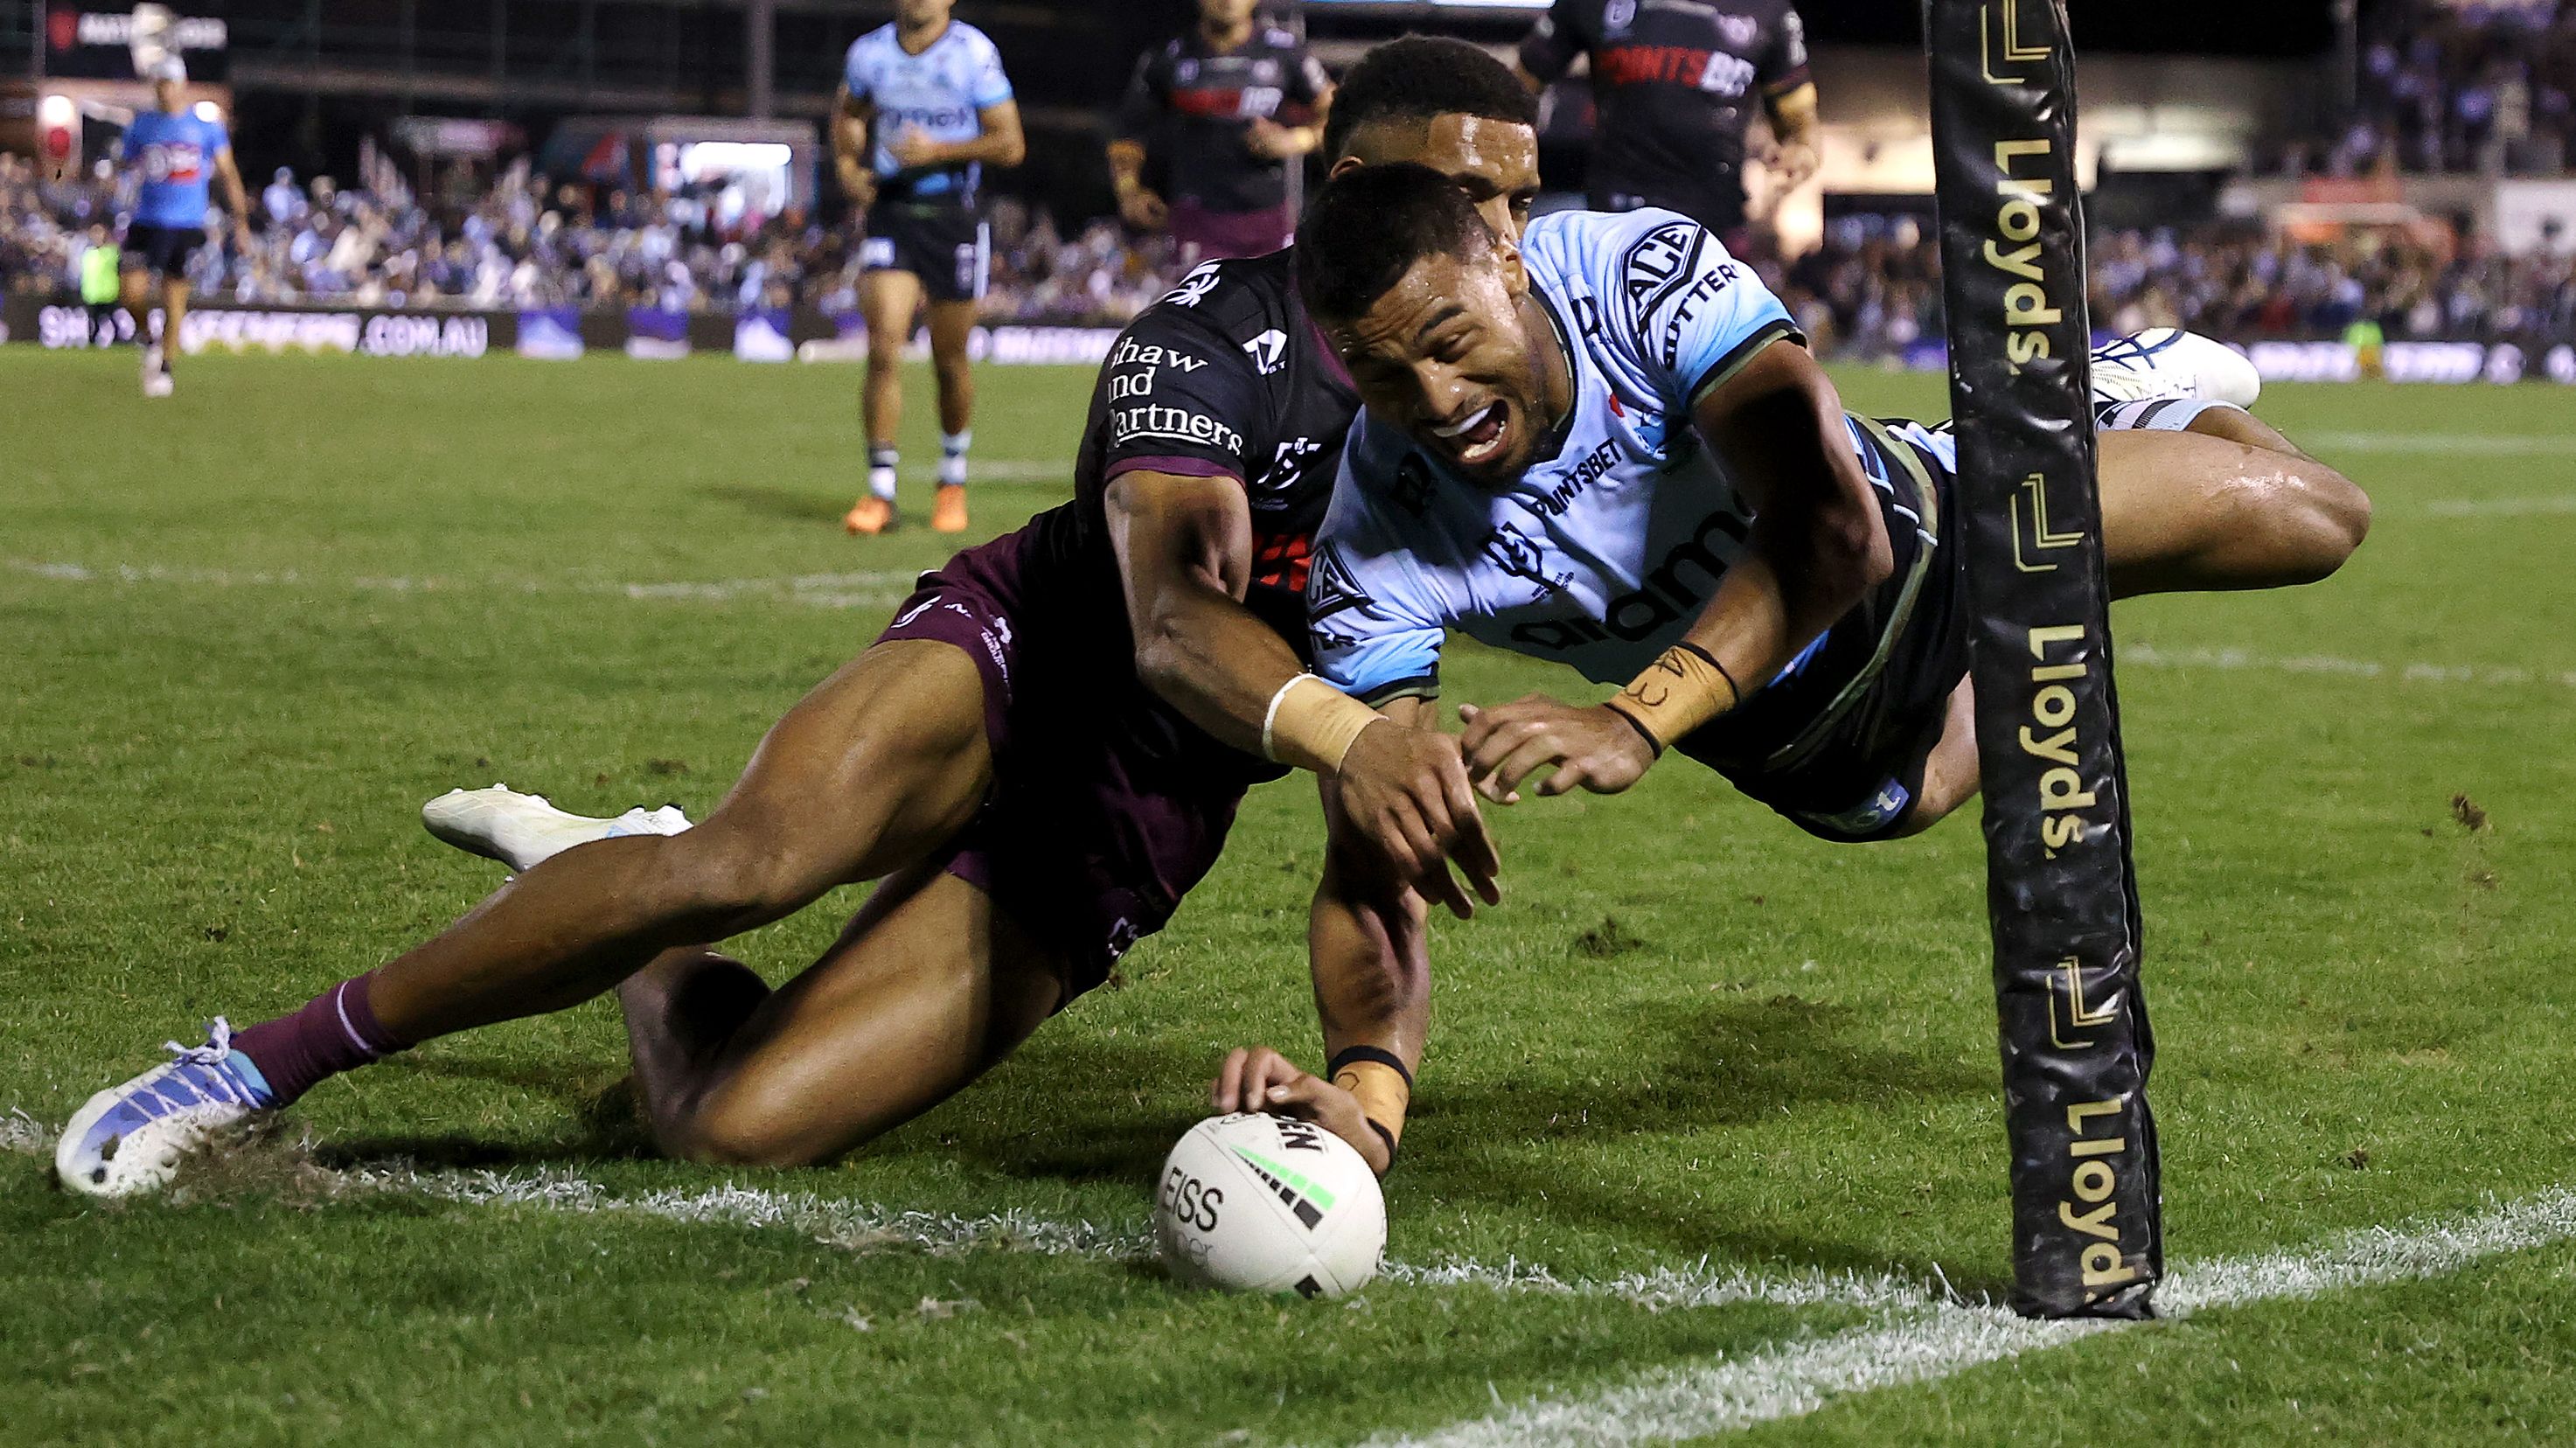 Ronaldo Mulitalo of the Sharks scores a try against Manly.